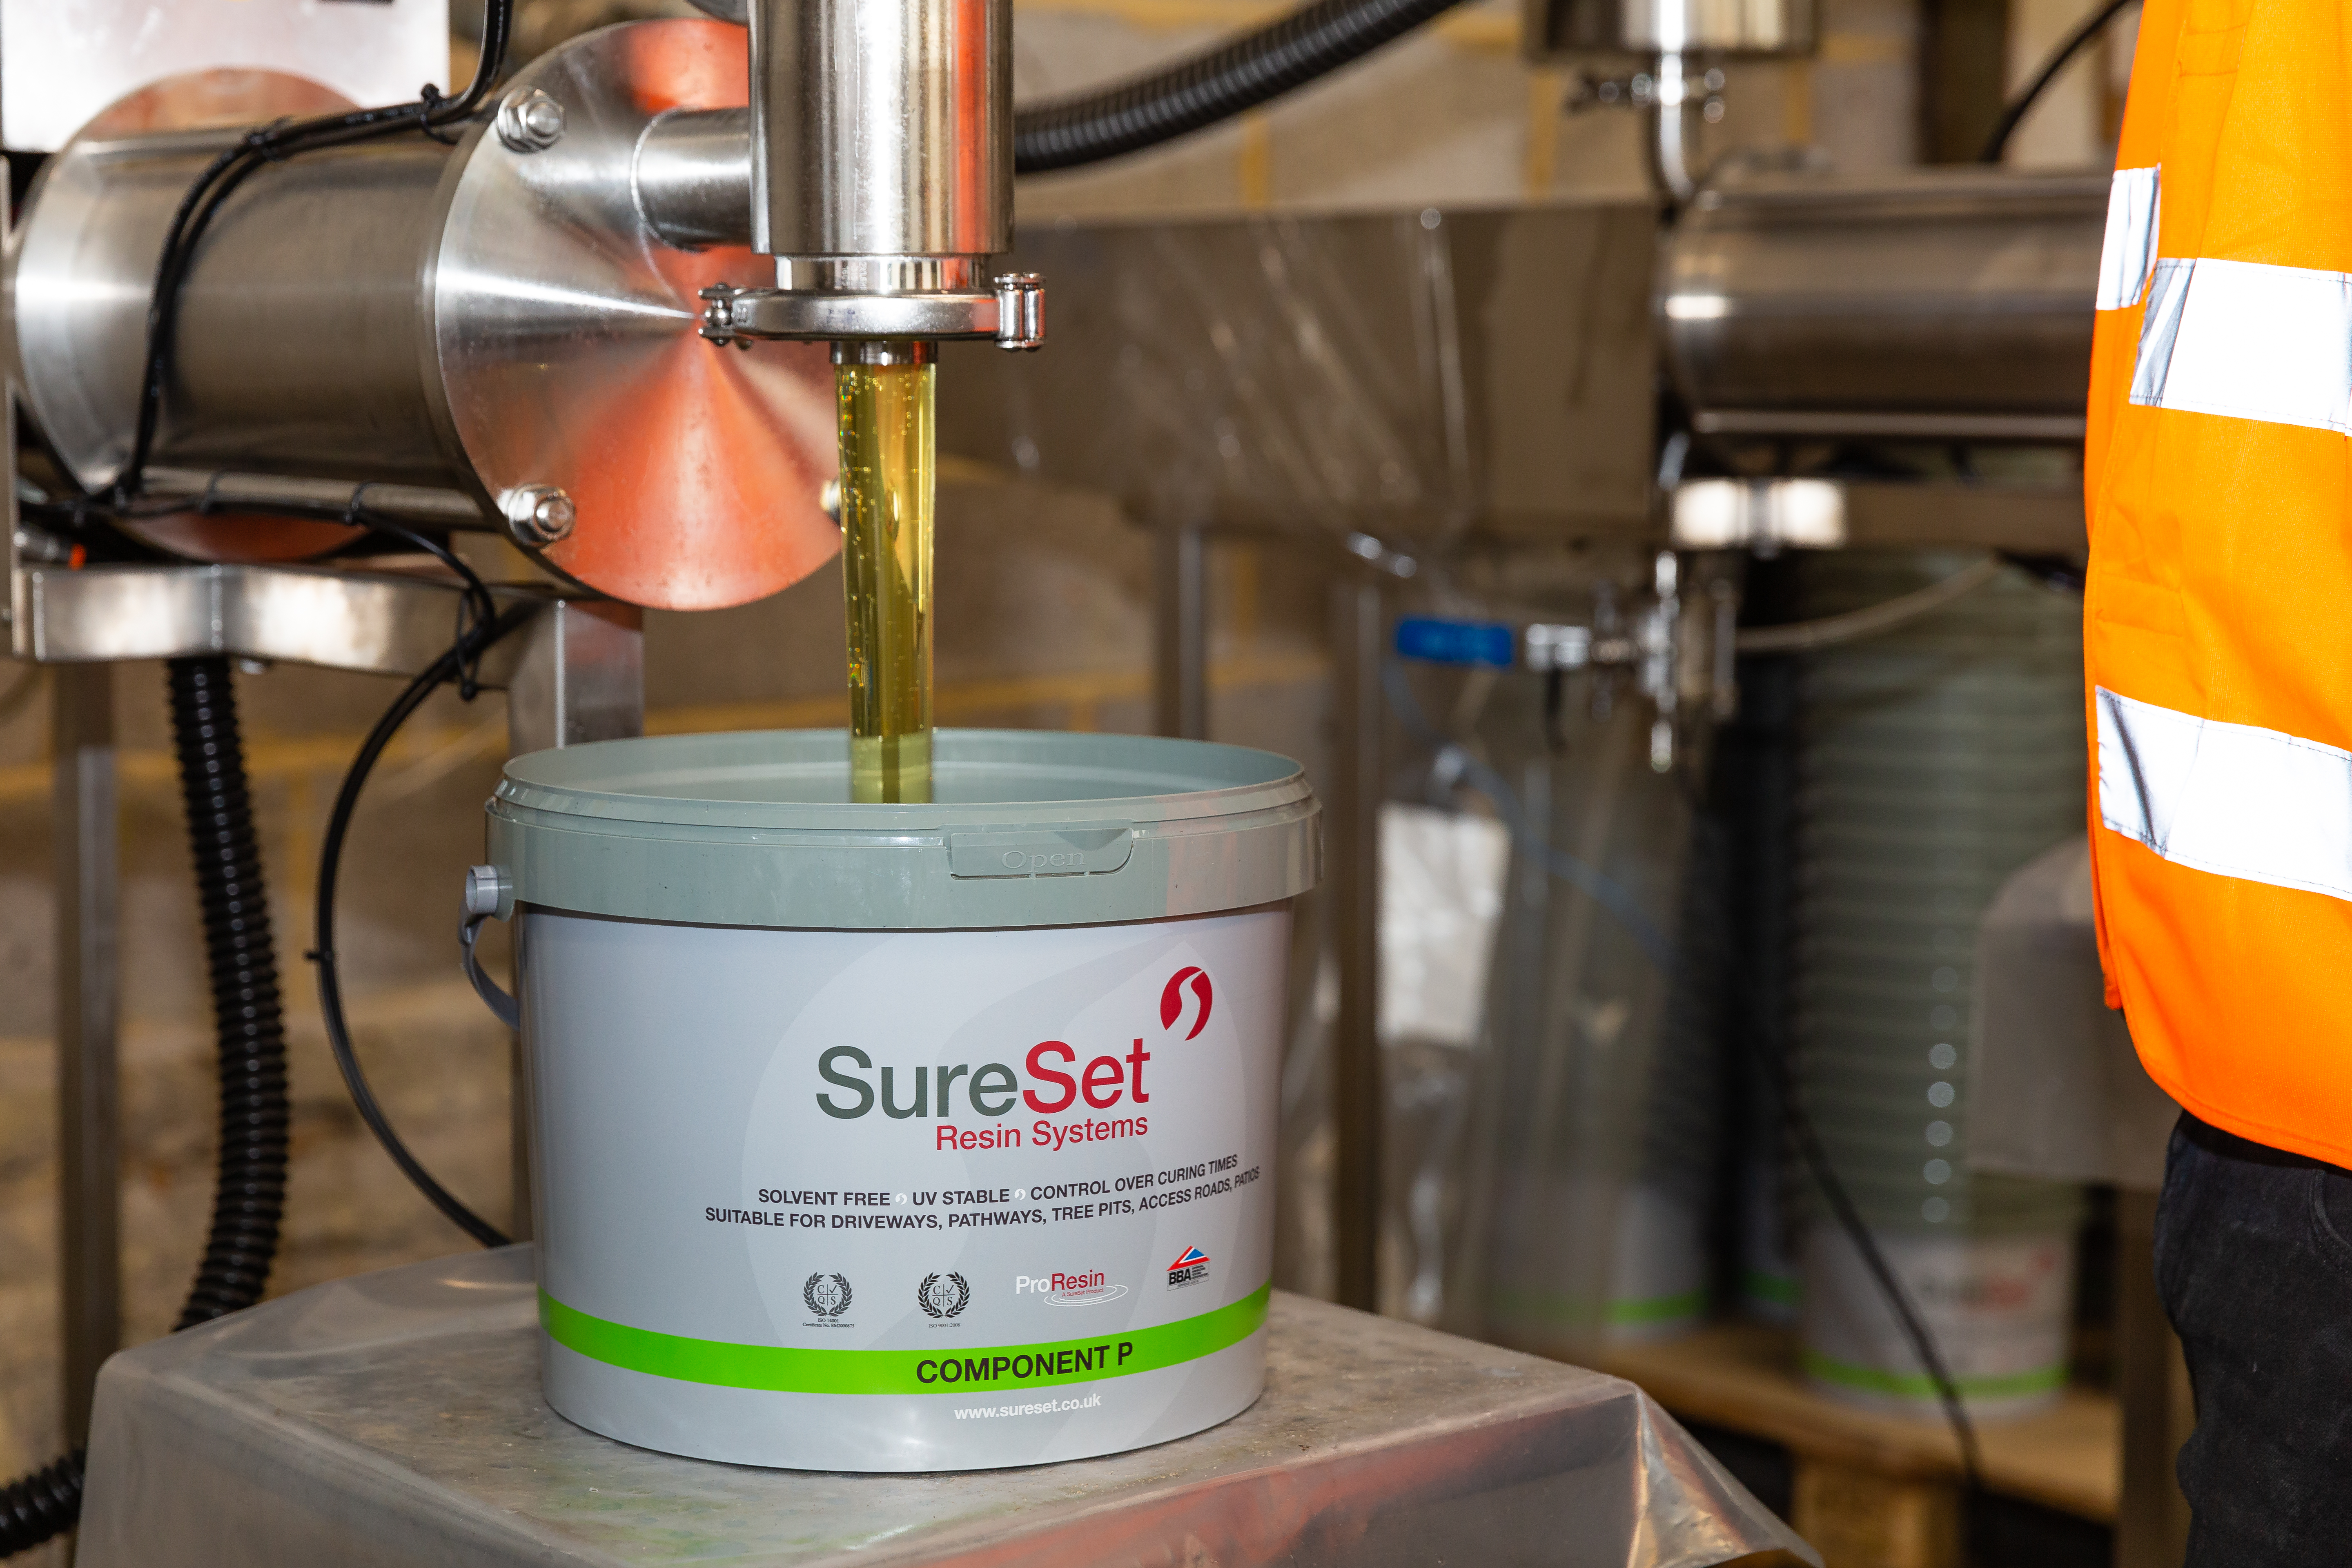 SureSet adds a new alternative resin to their ProResin range